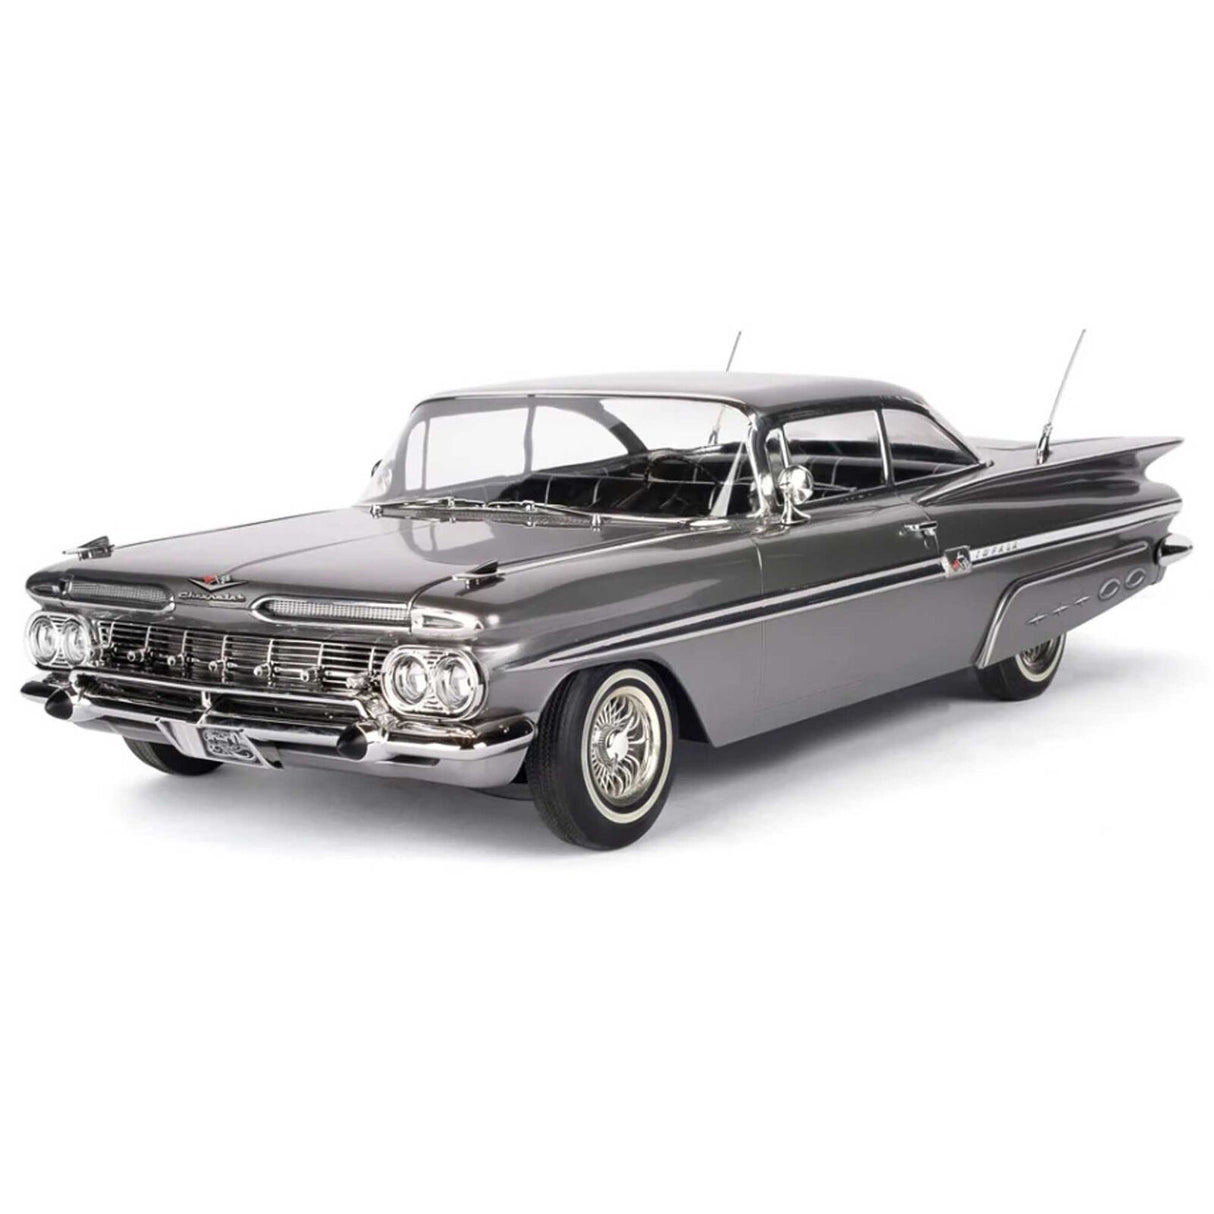 Redcat FiftyNine Classic Edition Voiture RC 1:10 1959 Chevrolet Impala Hopper